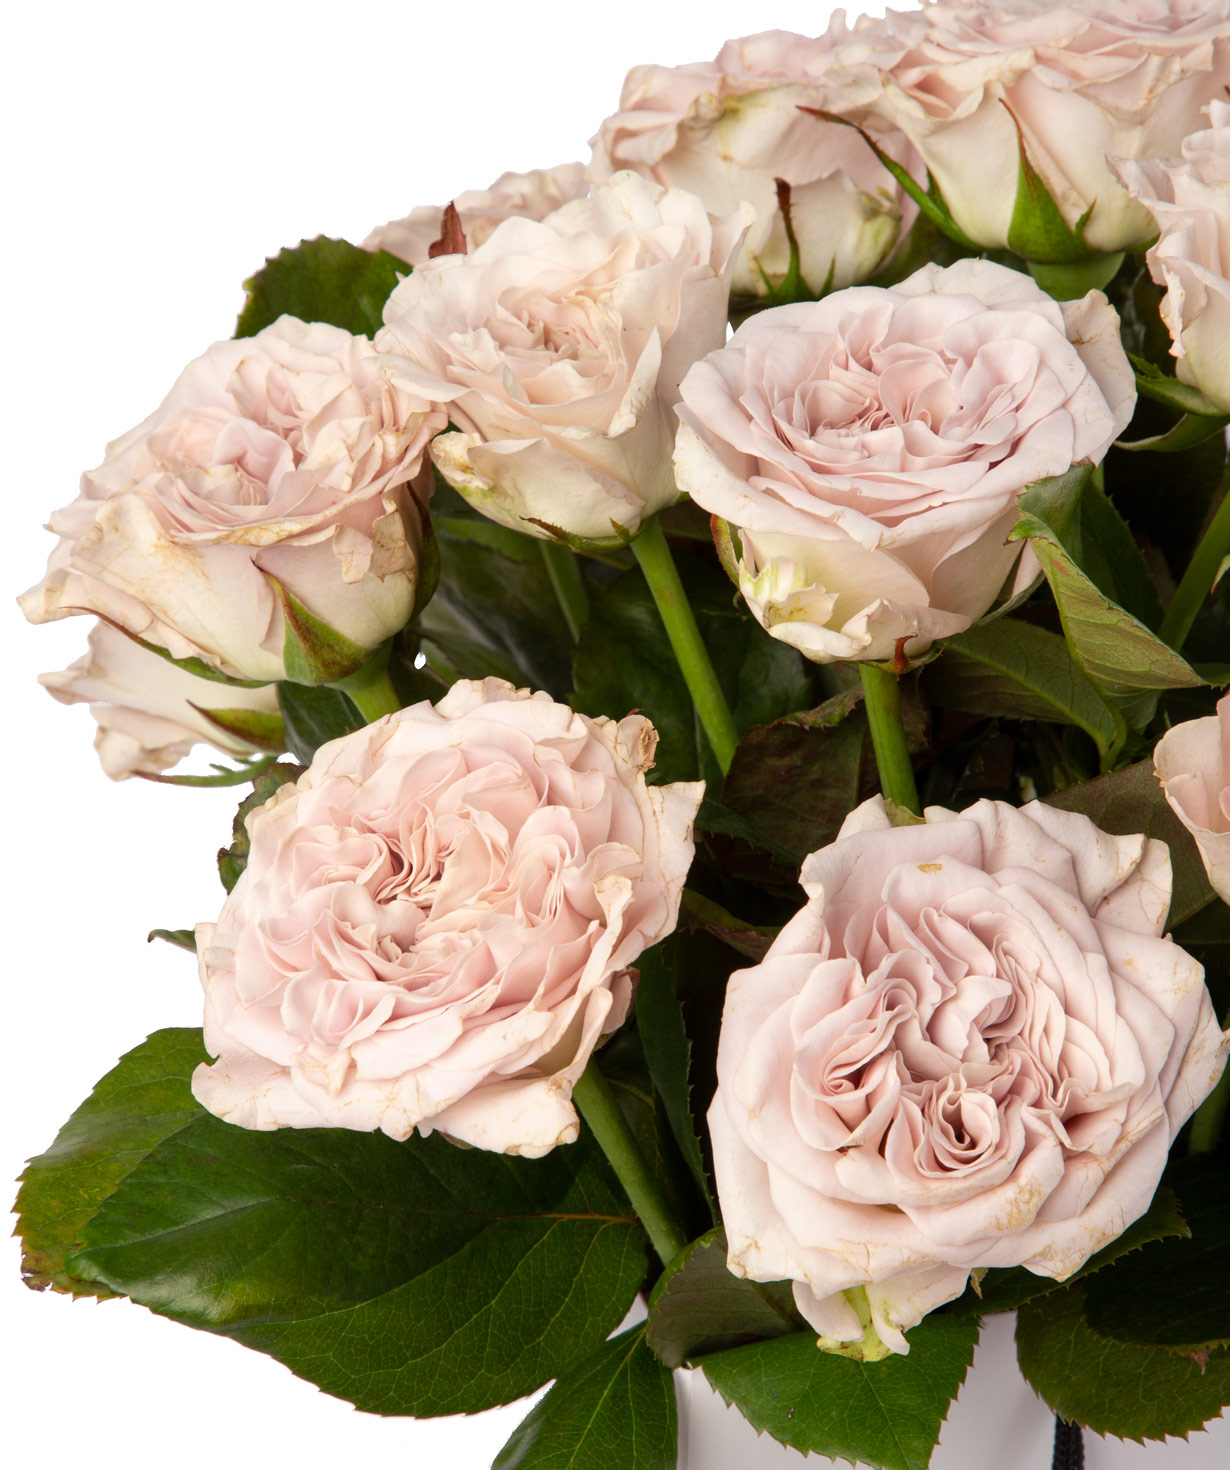 Composition `Chanel` with roses